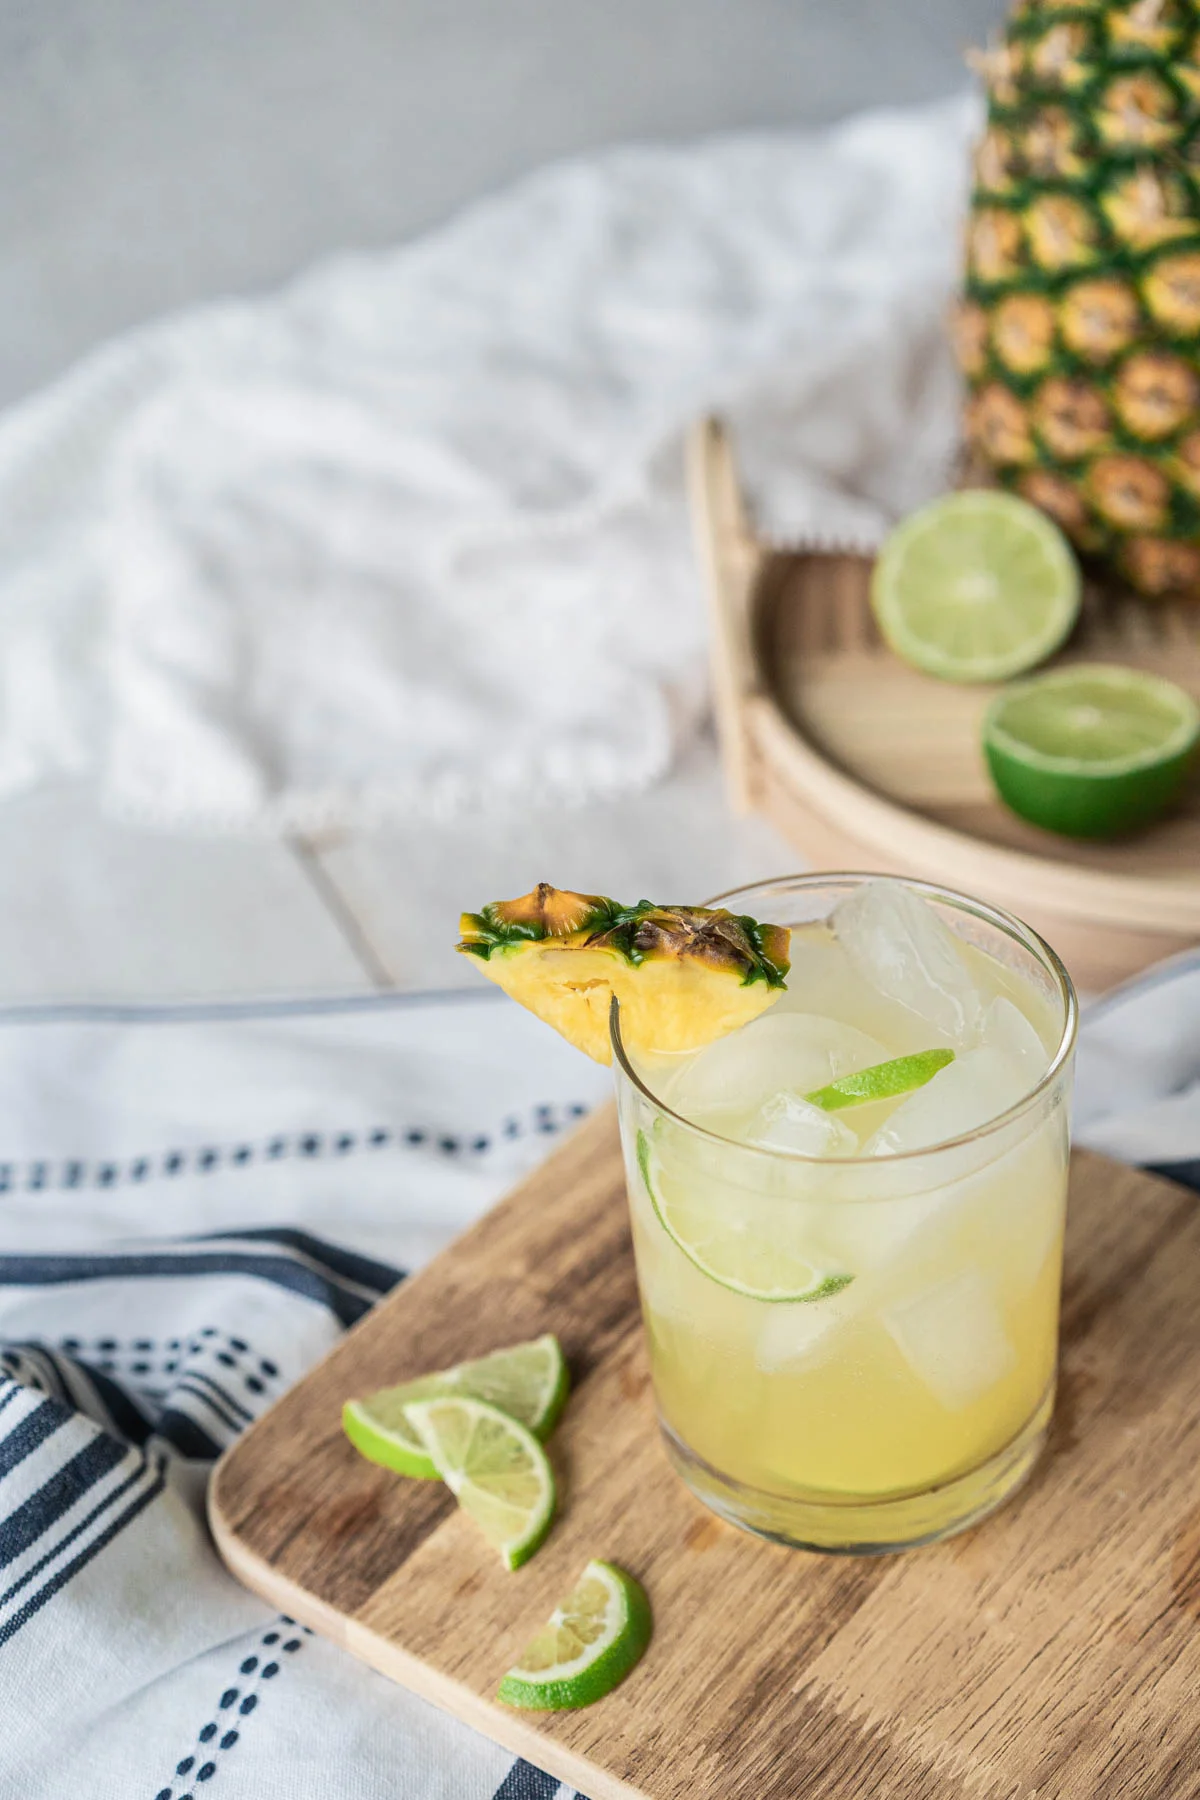 In the foreground, a rocks glass filled with ice and a light yellow drink, garnished with lime and pineapple wedges sits on a cutting board. Blurred in the background is a large pineapple and sliced limes